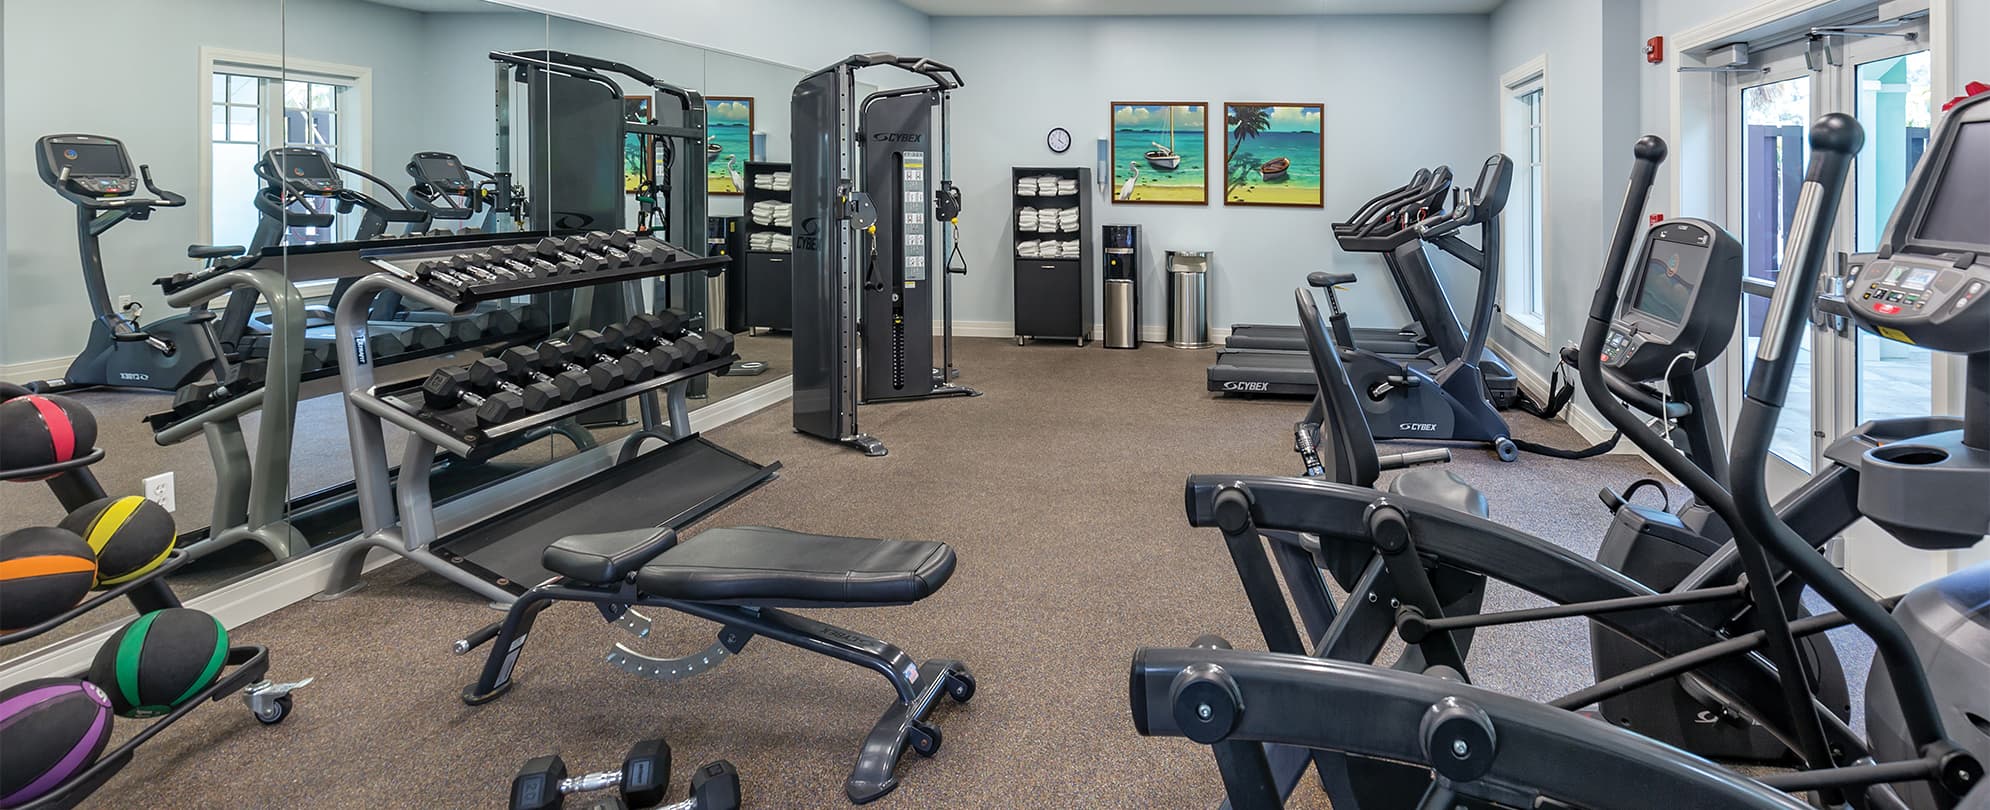 Fitness equipment at the gym of Margaritaville Vacation Club by Wyndham - St. Thomas, a U.S. Virgin Islands timeshare resort.